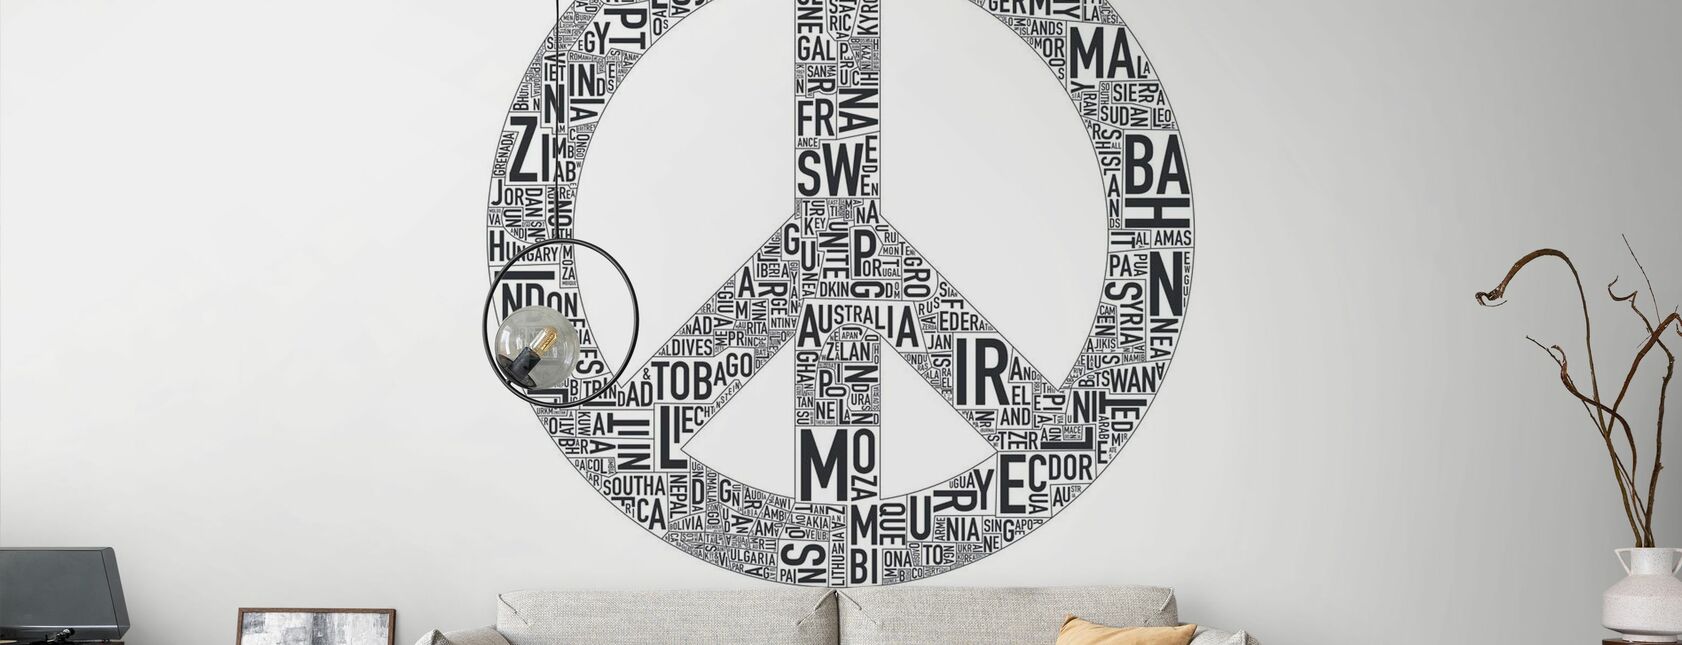 The Peace - Wallpaper - Living Room